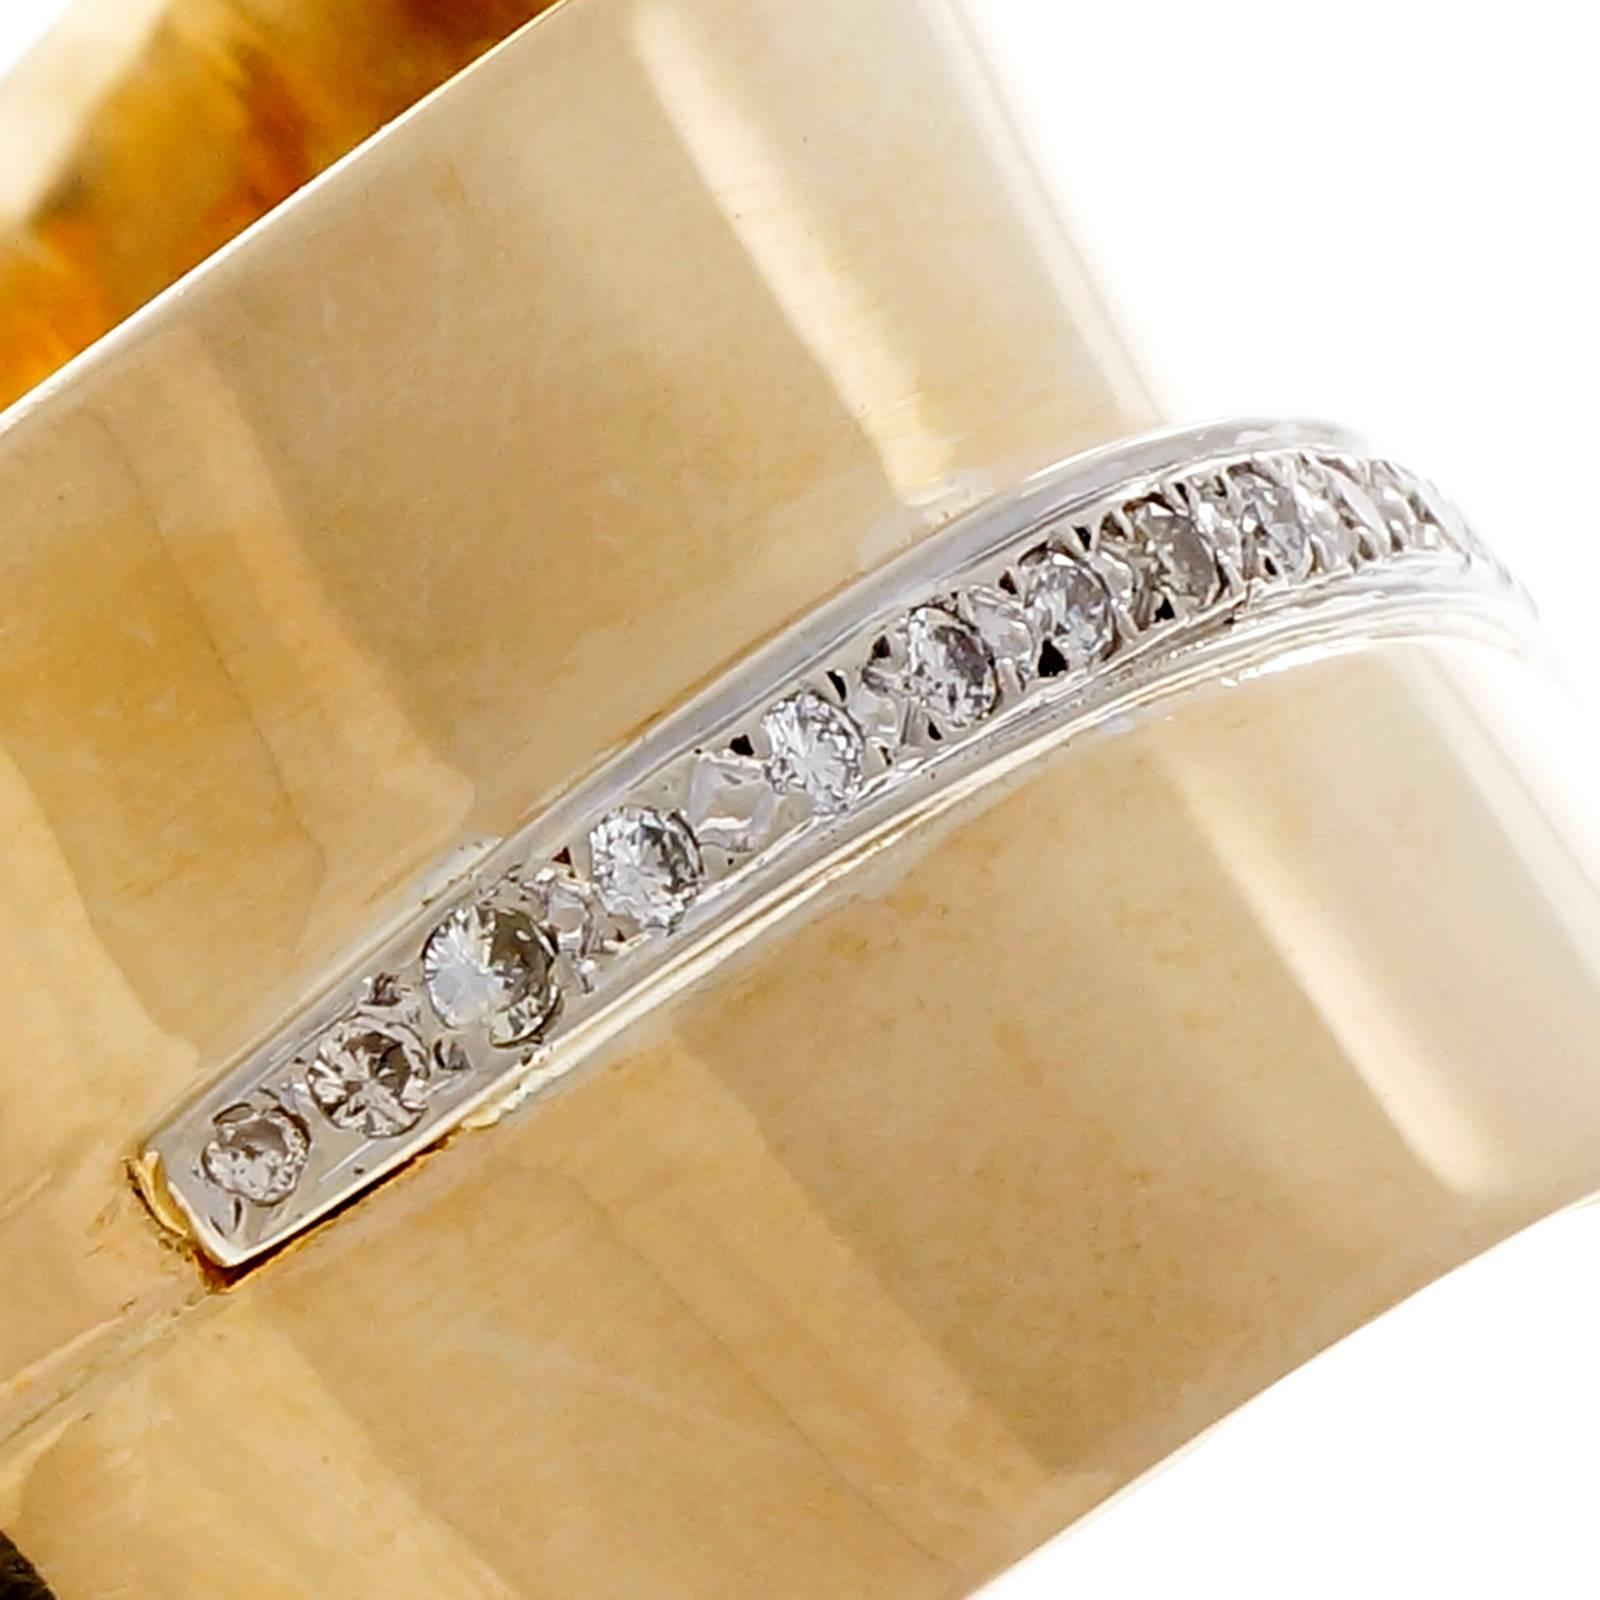 1950's Large modernist double spring loaded diamond gold bangle bracelet, with 21 round diamond accents in 14k yellow and white gold.  Fits up to 7.5 wrist. 

21 round diamonds, approx. total weight .63cts, H, VS2 – SI1
14k yellow gold & white